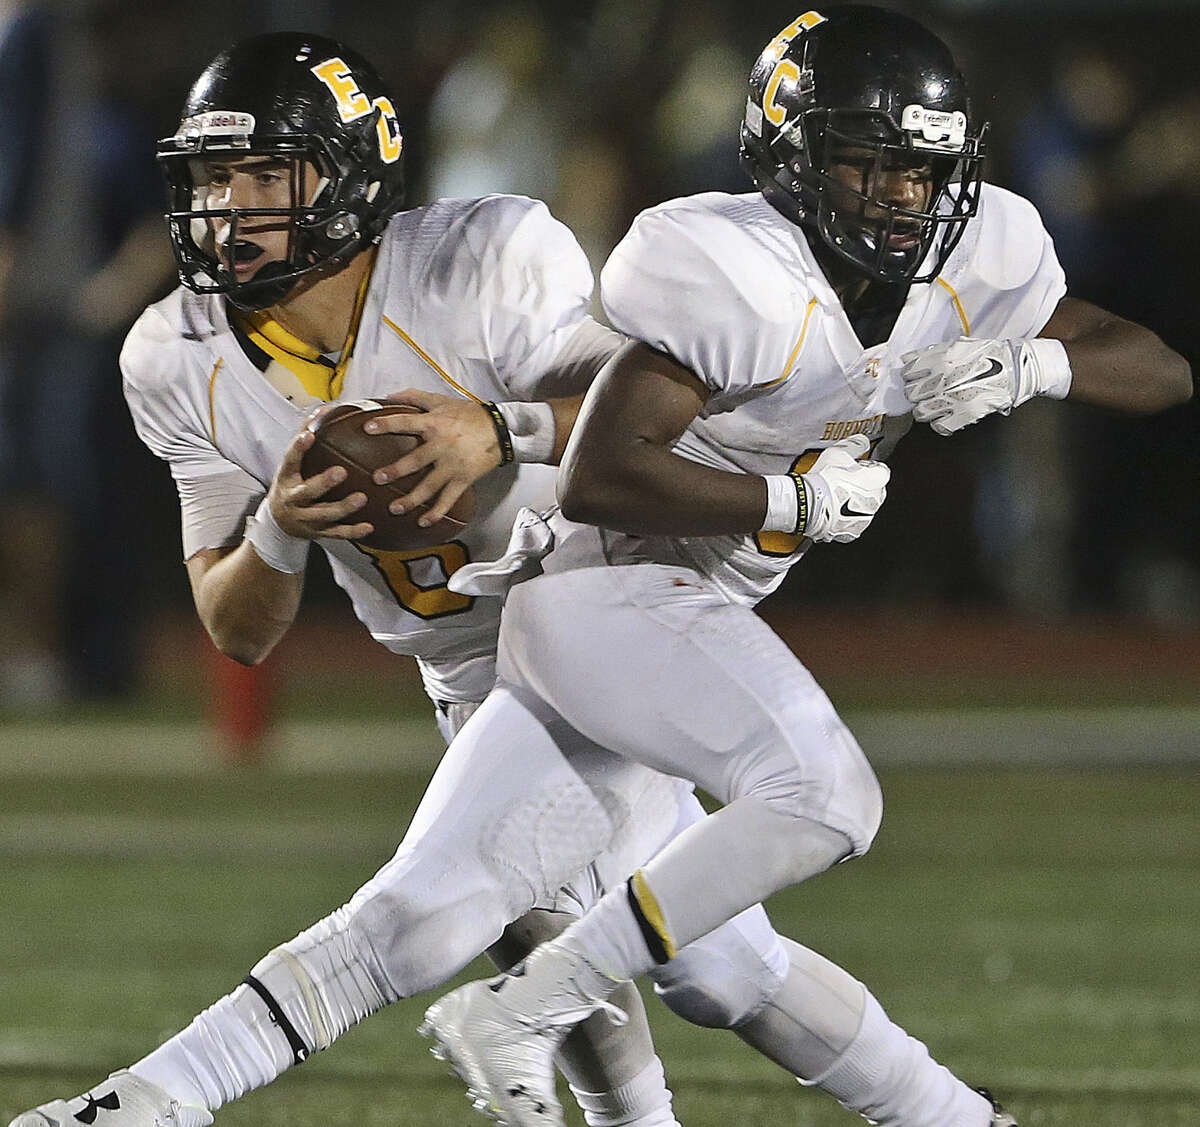 Hornet quarterback Justin Upshaw Mendoza (left) and running back Jauwan Hall hope to help the team bounce back when East Central faces Del Rio this week.